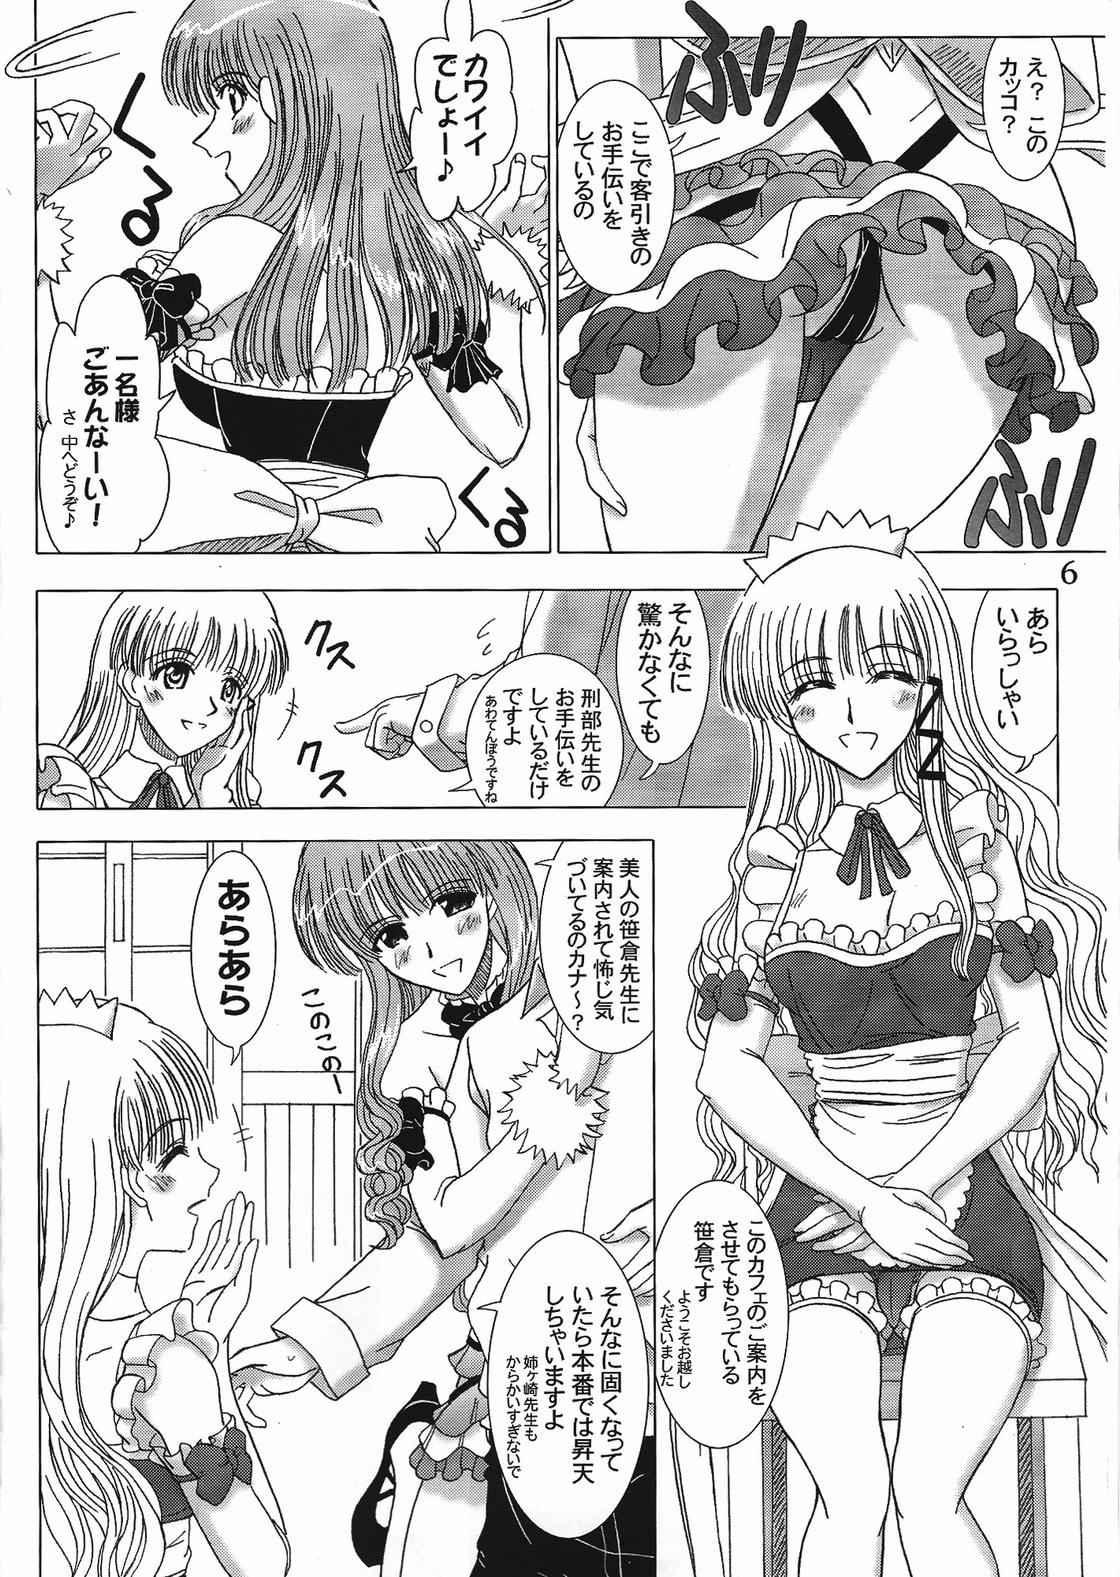 Women Sucking Dick Cafe Tea Ceremony Club - School rumble Muscles - Page 5